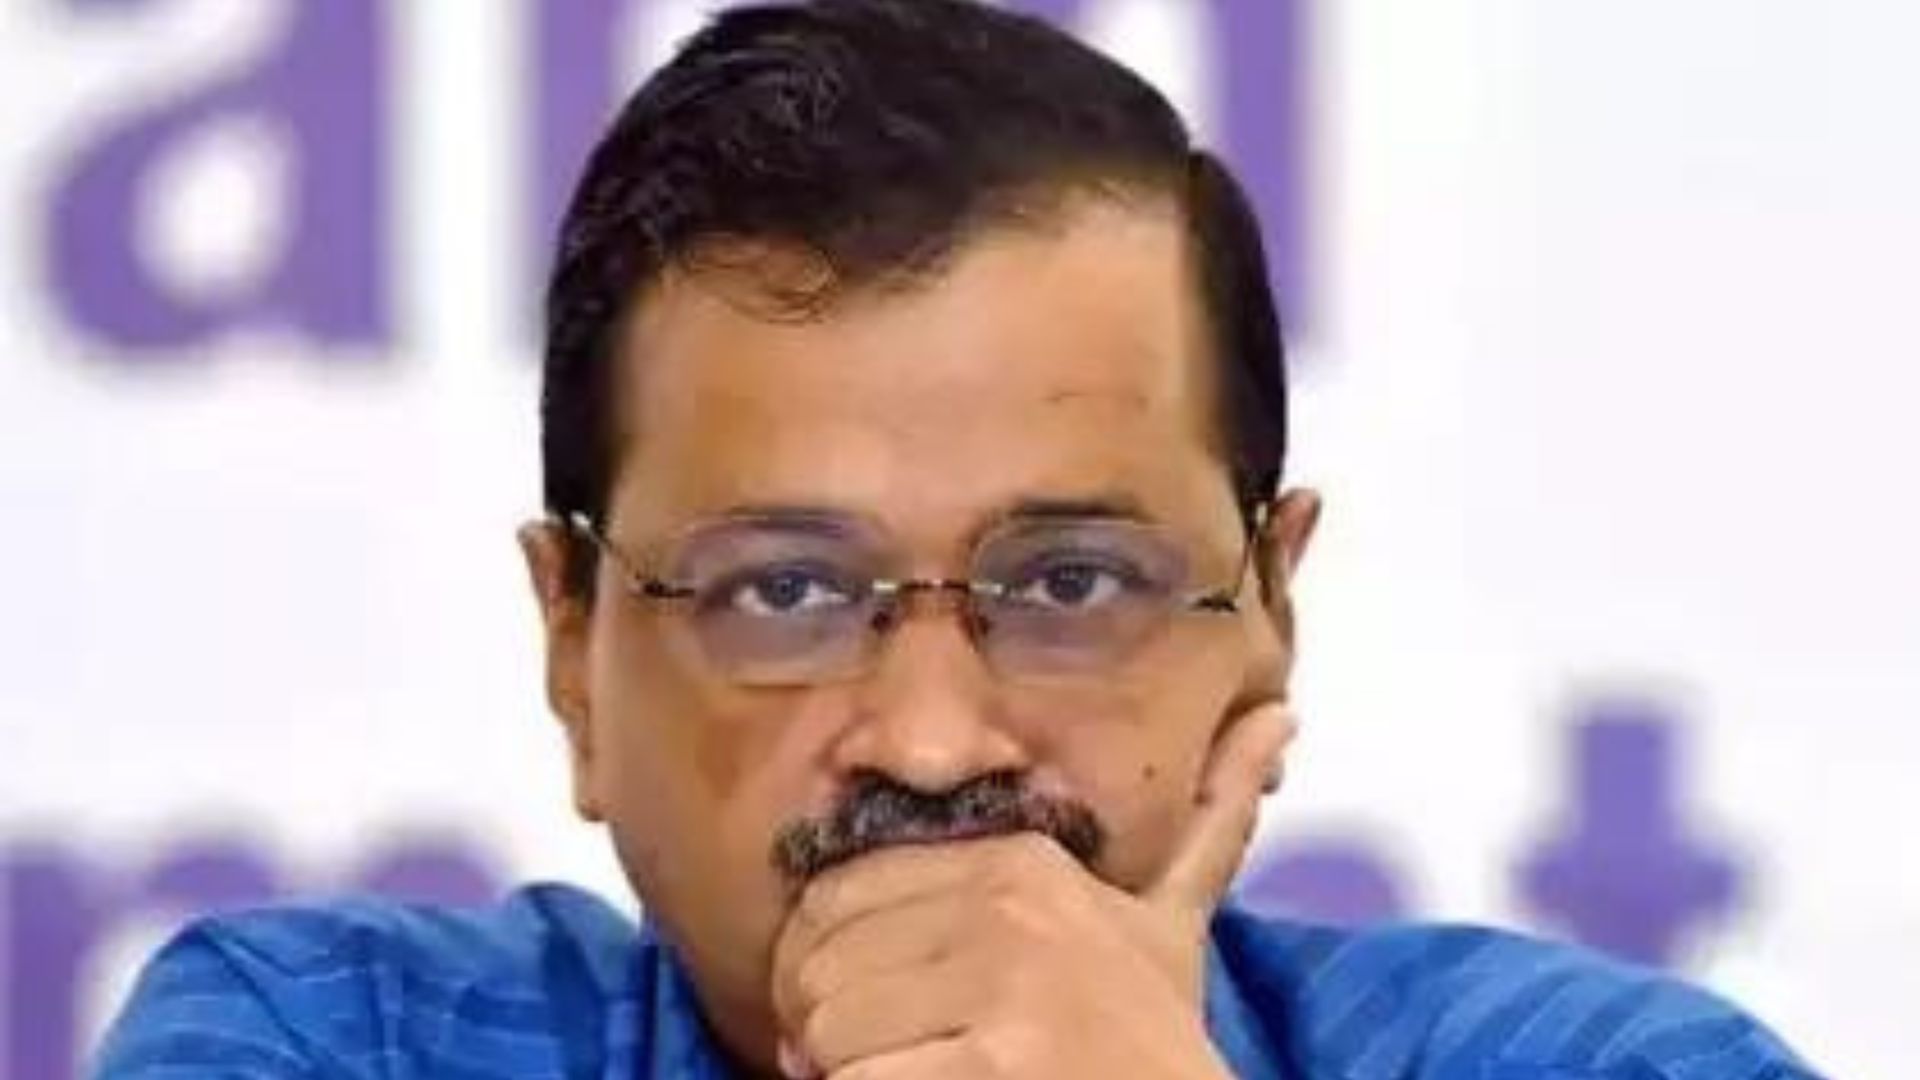 Delhi court: Extensive Campaigns Indicate Kejriwal Not Suffering From Life-Threatening Ailment